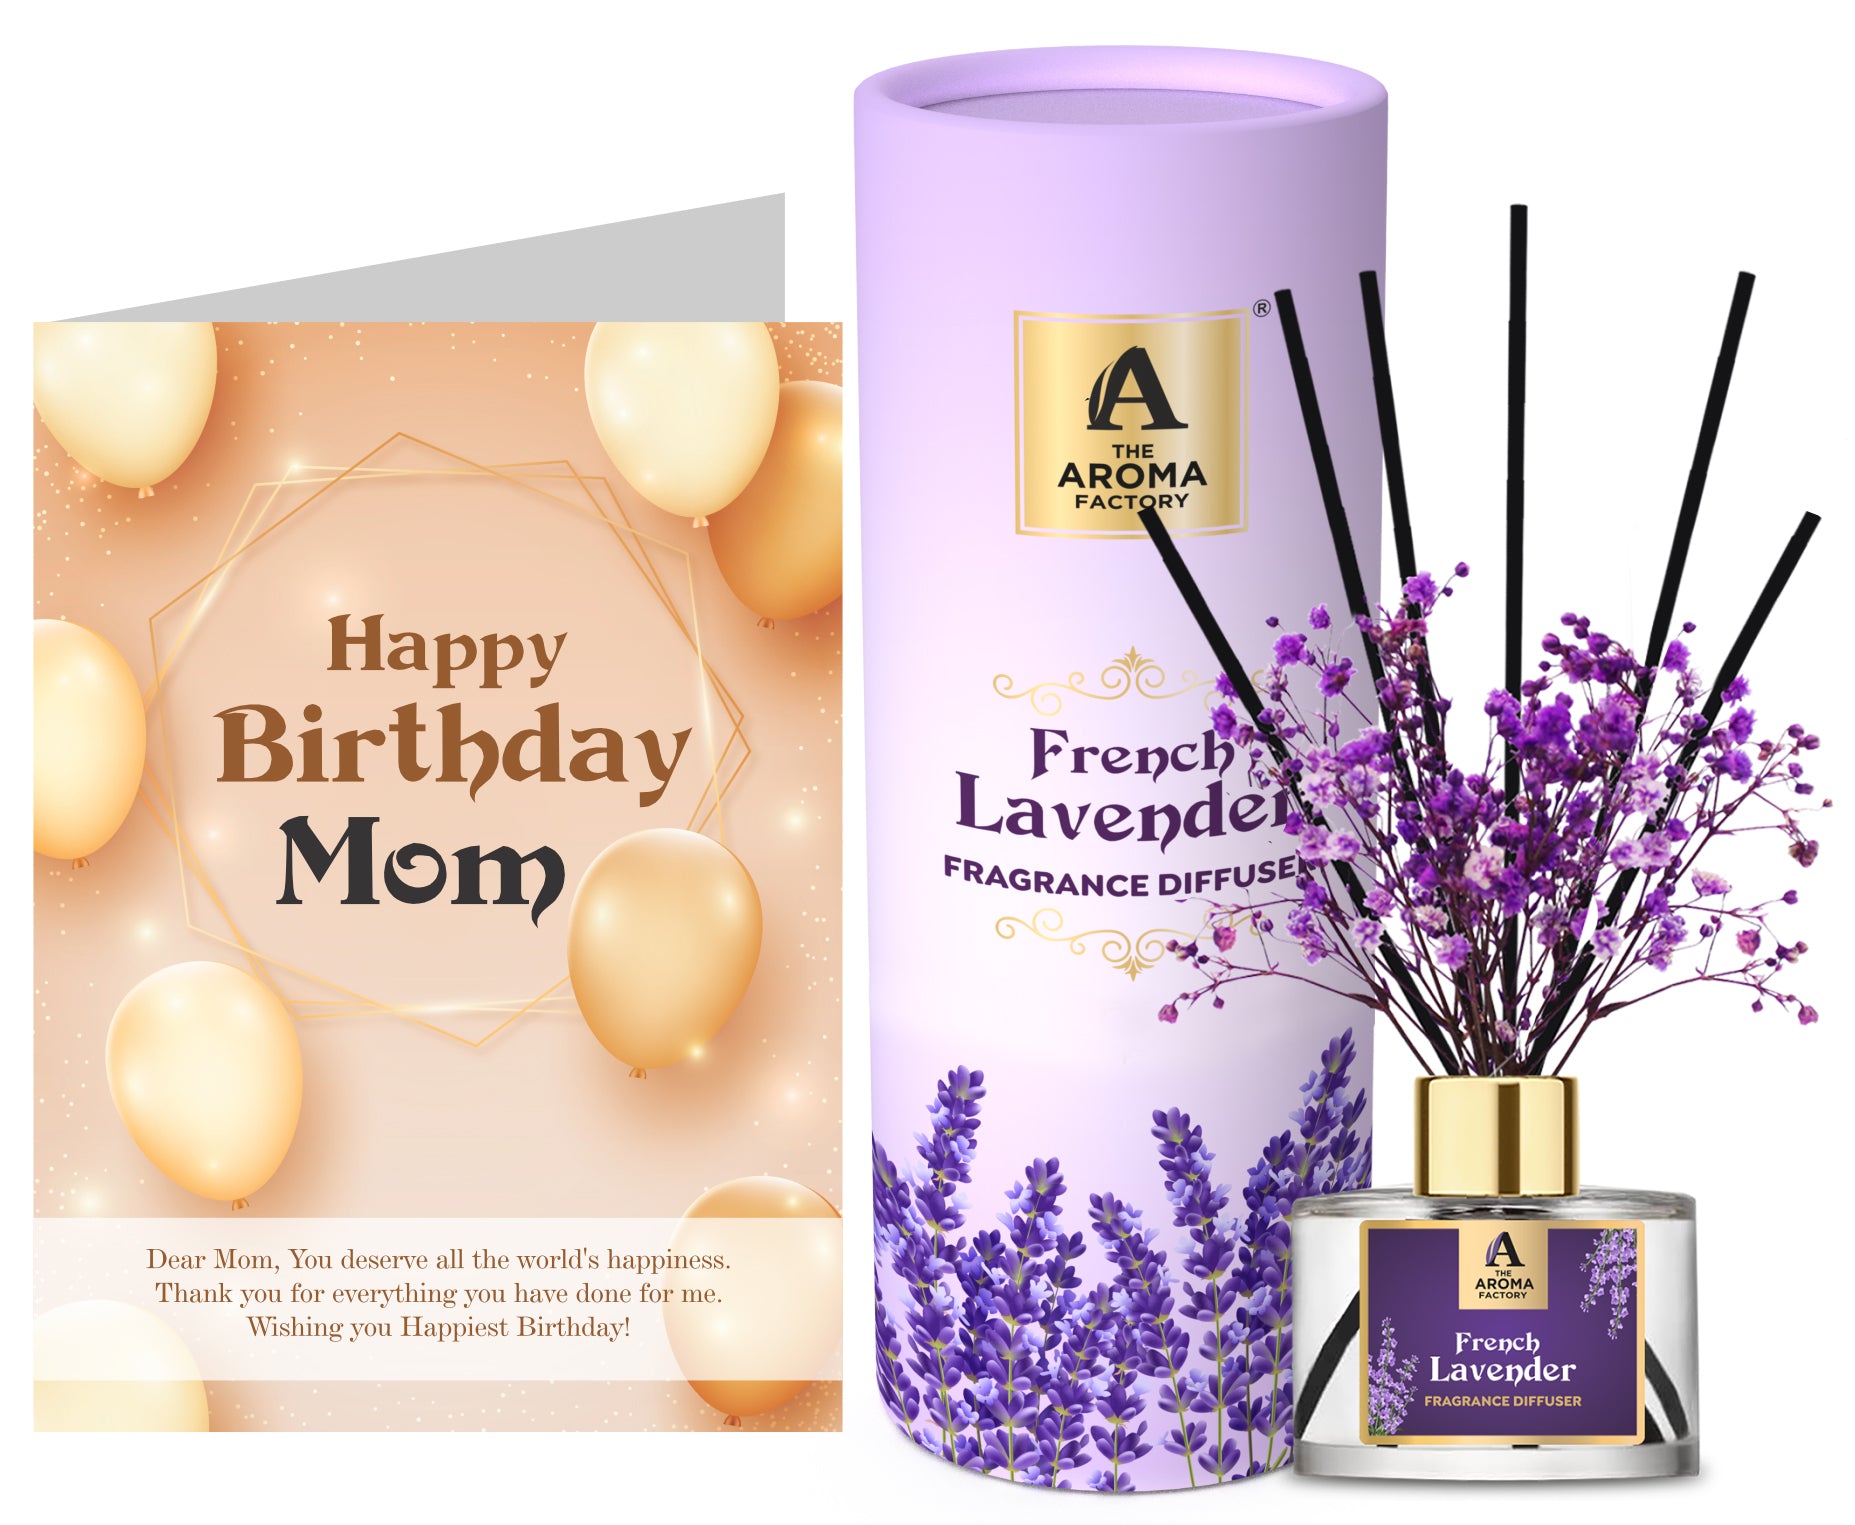 The Aroma Factory Happy Birthday Mom Mother Gift with Card, French Lavender Fragrance Reed Diffuser Set (1 Box + 1 Card)